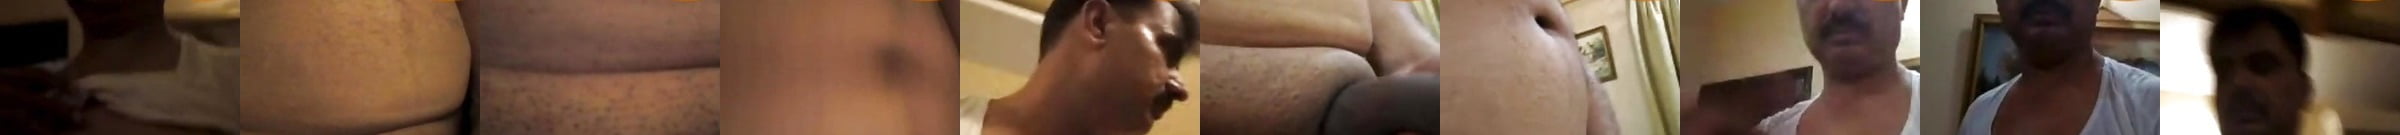 Pakistani Gay Hd Porn Videos With Anal Sex Action Xhamster